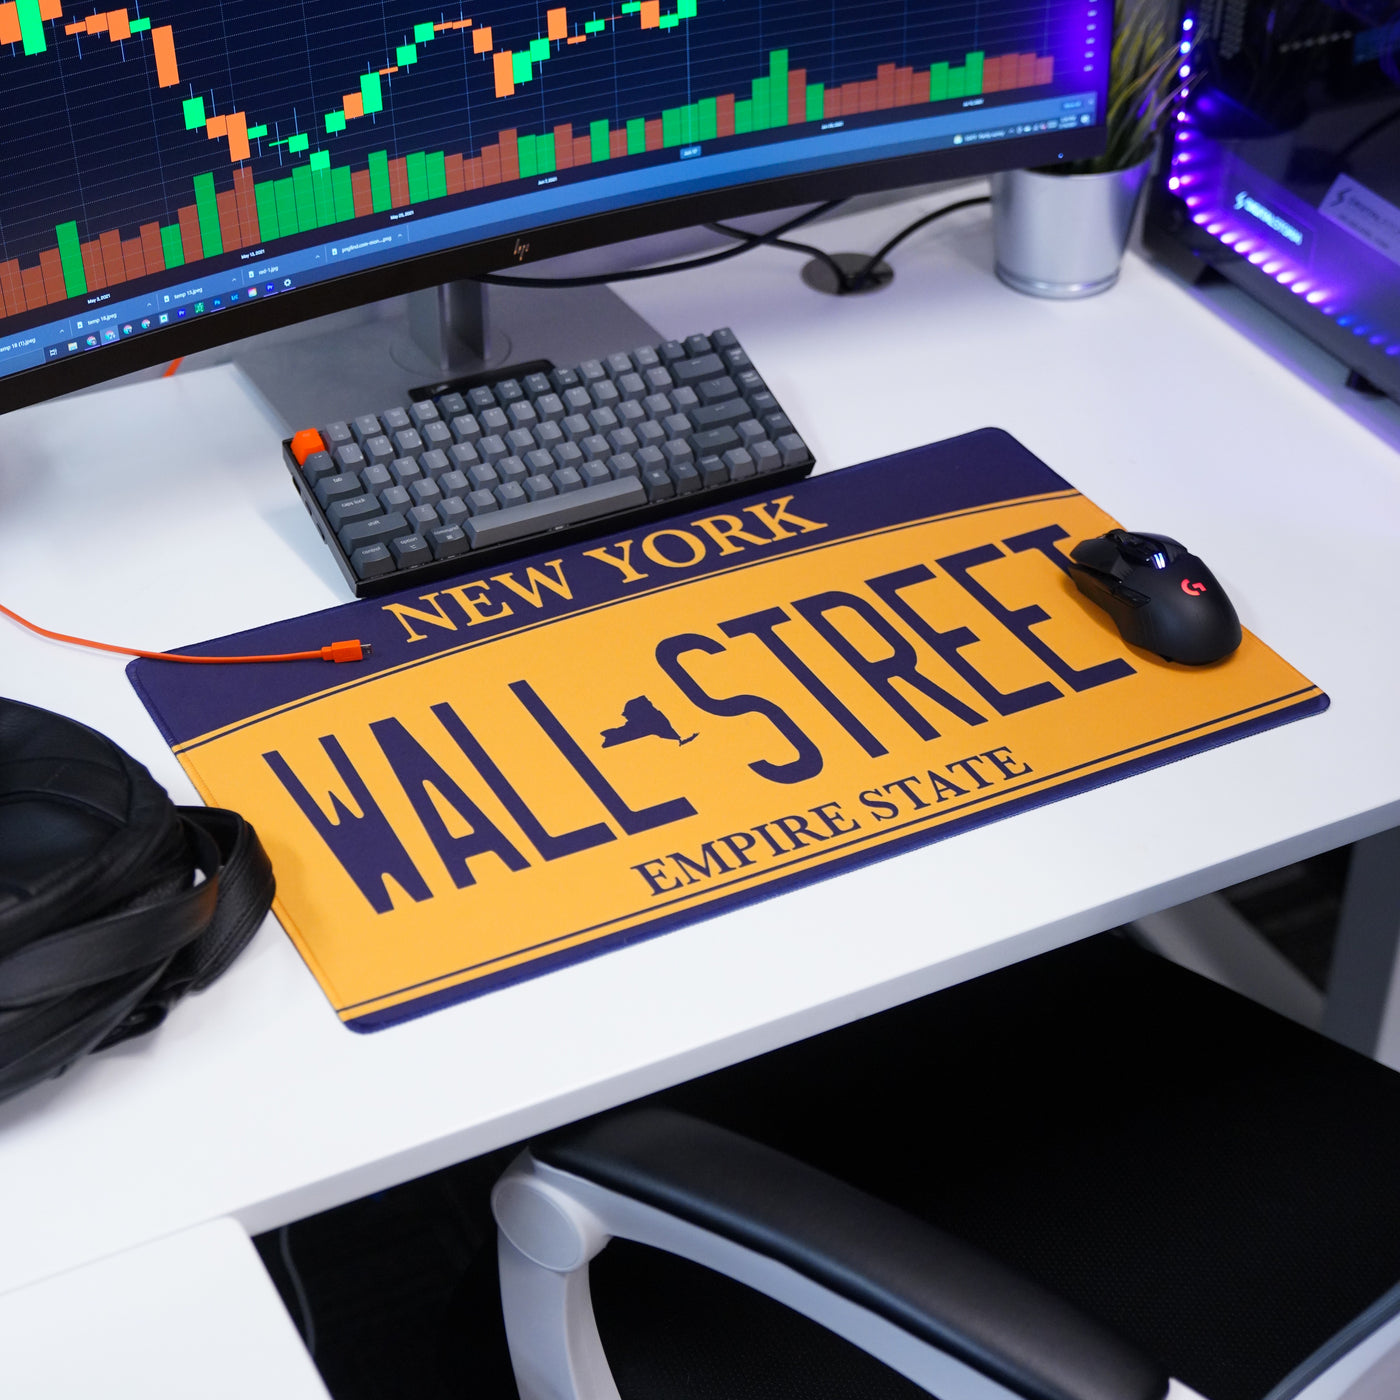 Wall Street License Mouse Pad